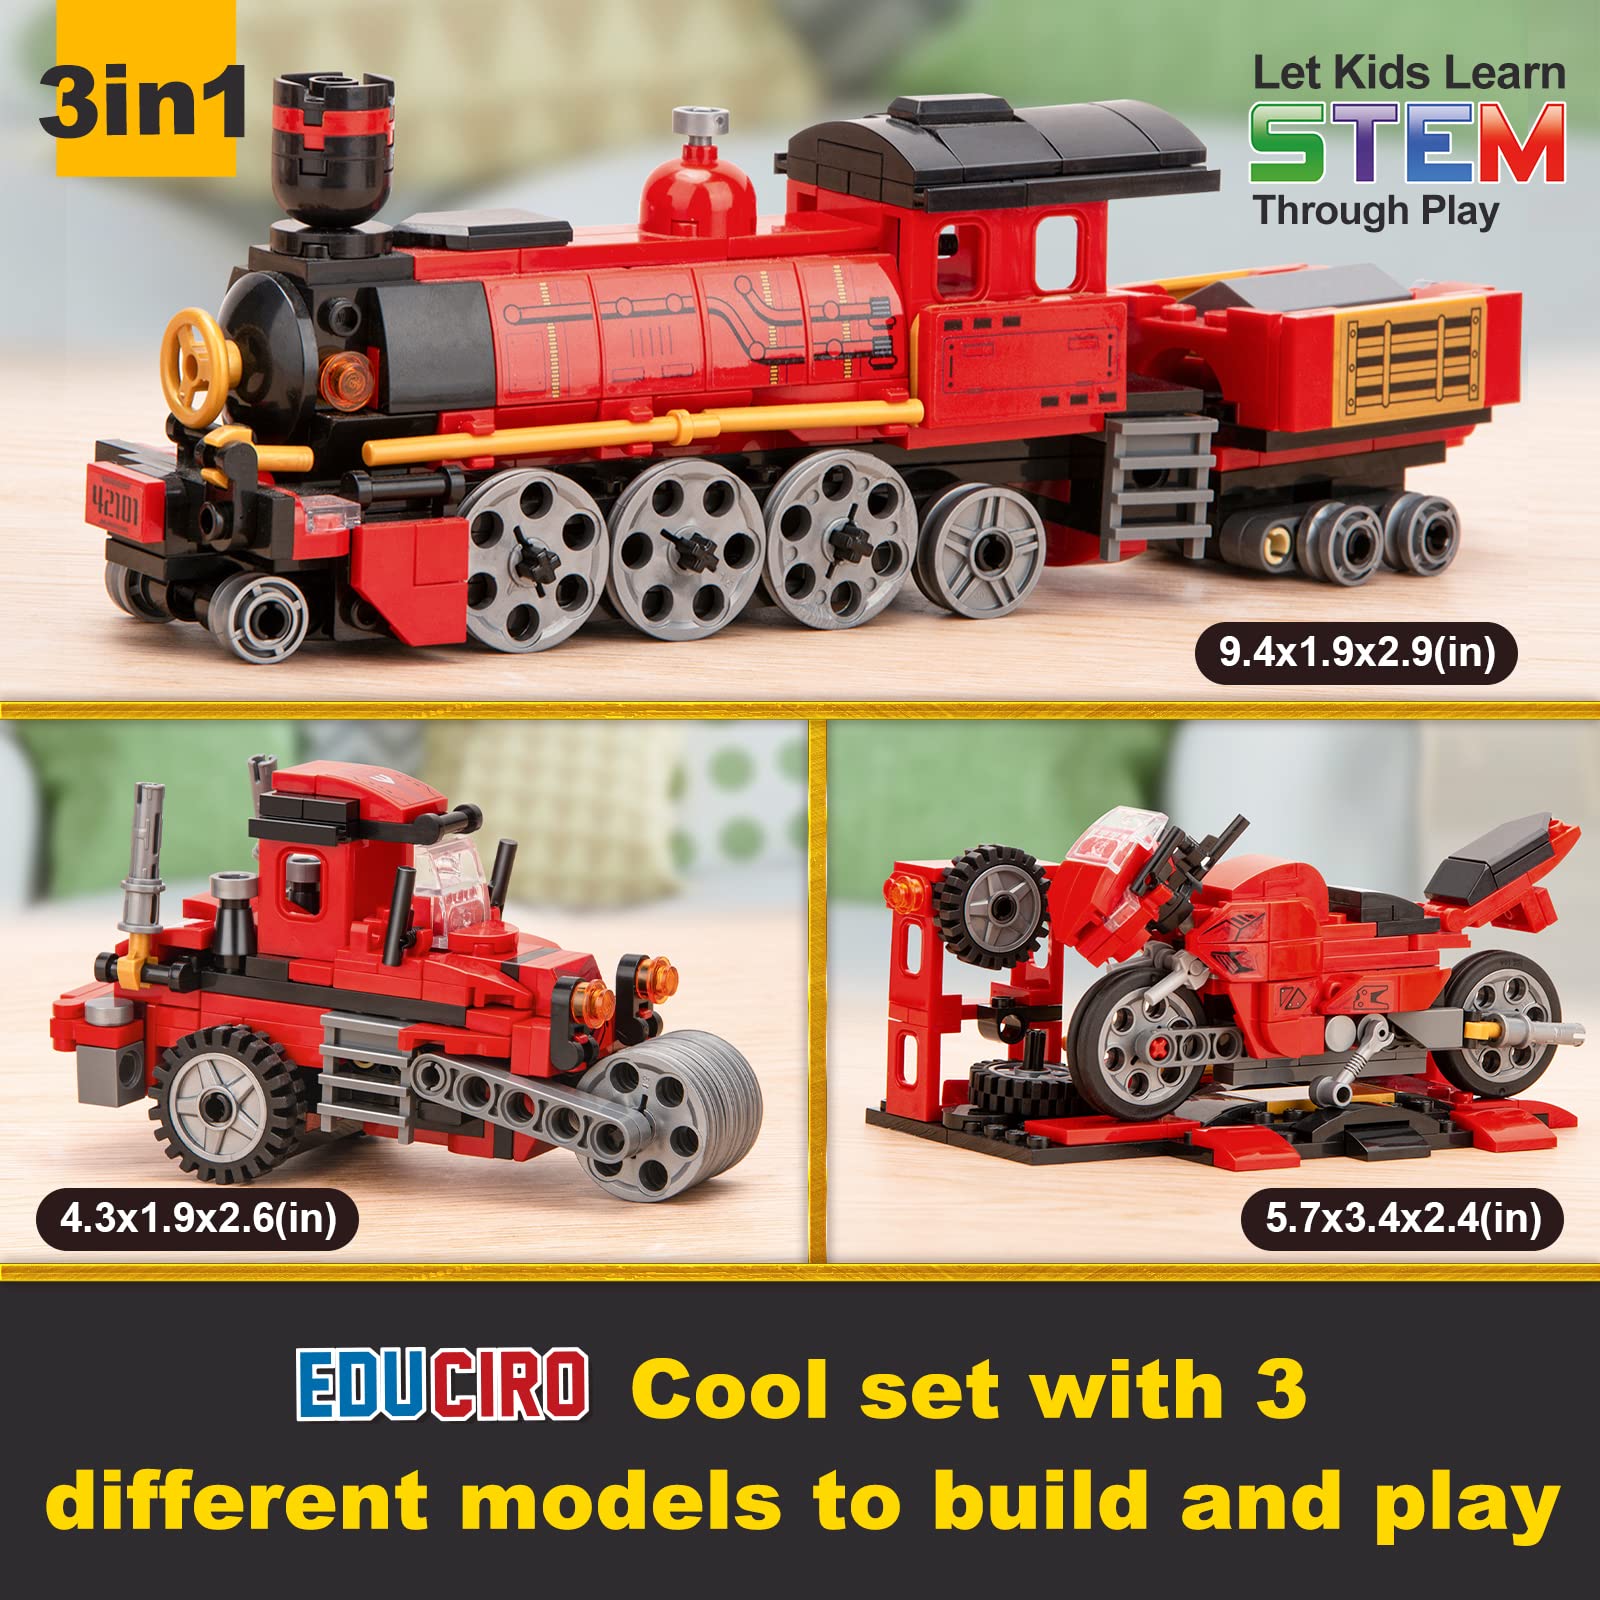 EDUCIRO Harry Train Toys 3in1 Building Kit (305 Pieces), Interactive Gifts Creator Sets Featuring Motorcycle and Steamroller for Boys, Girls, and Kids Ages 6+